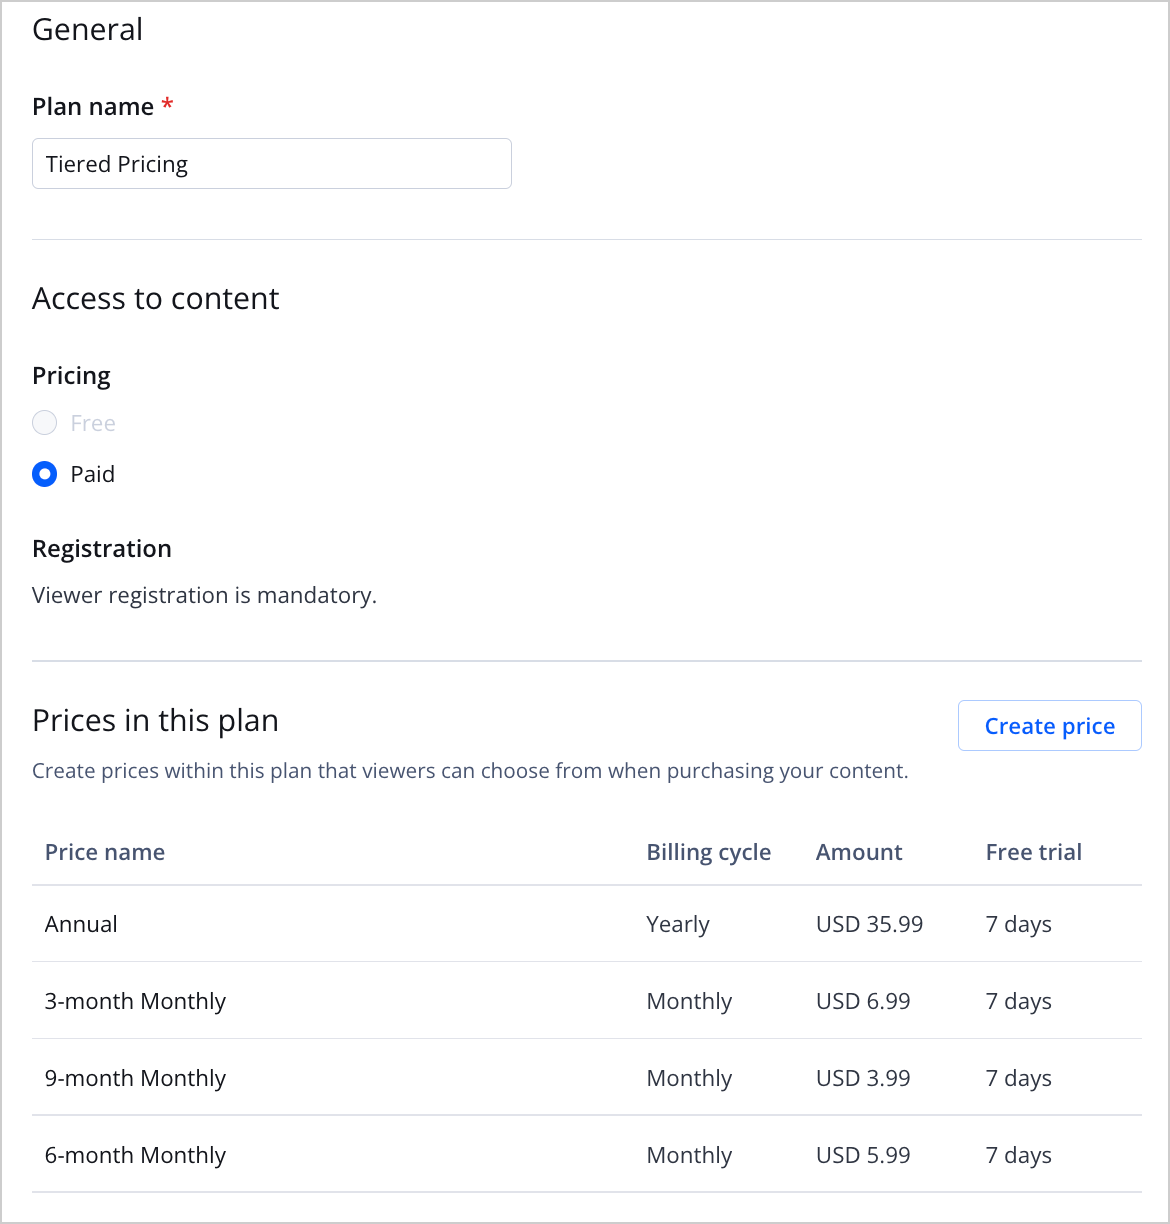 A plan with tiered pricing